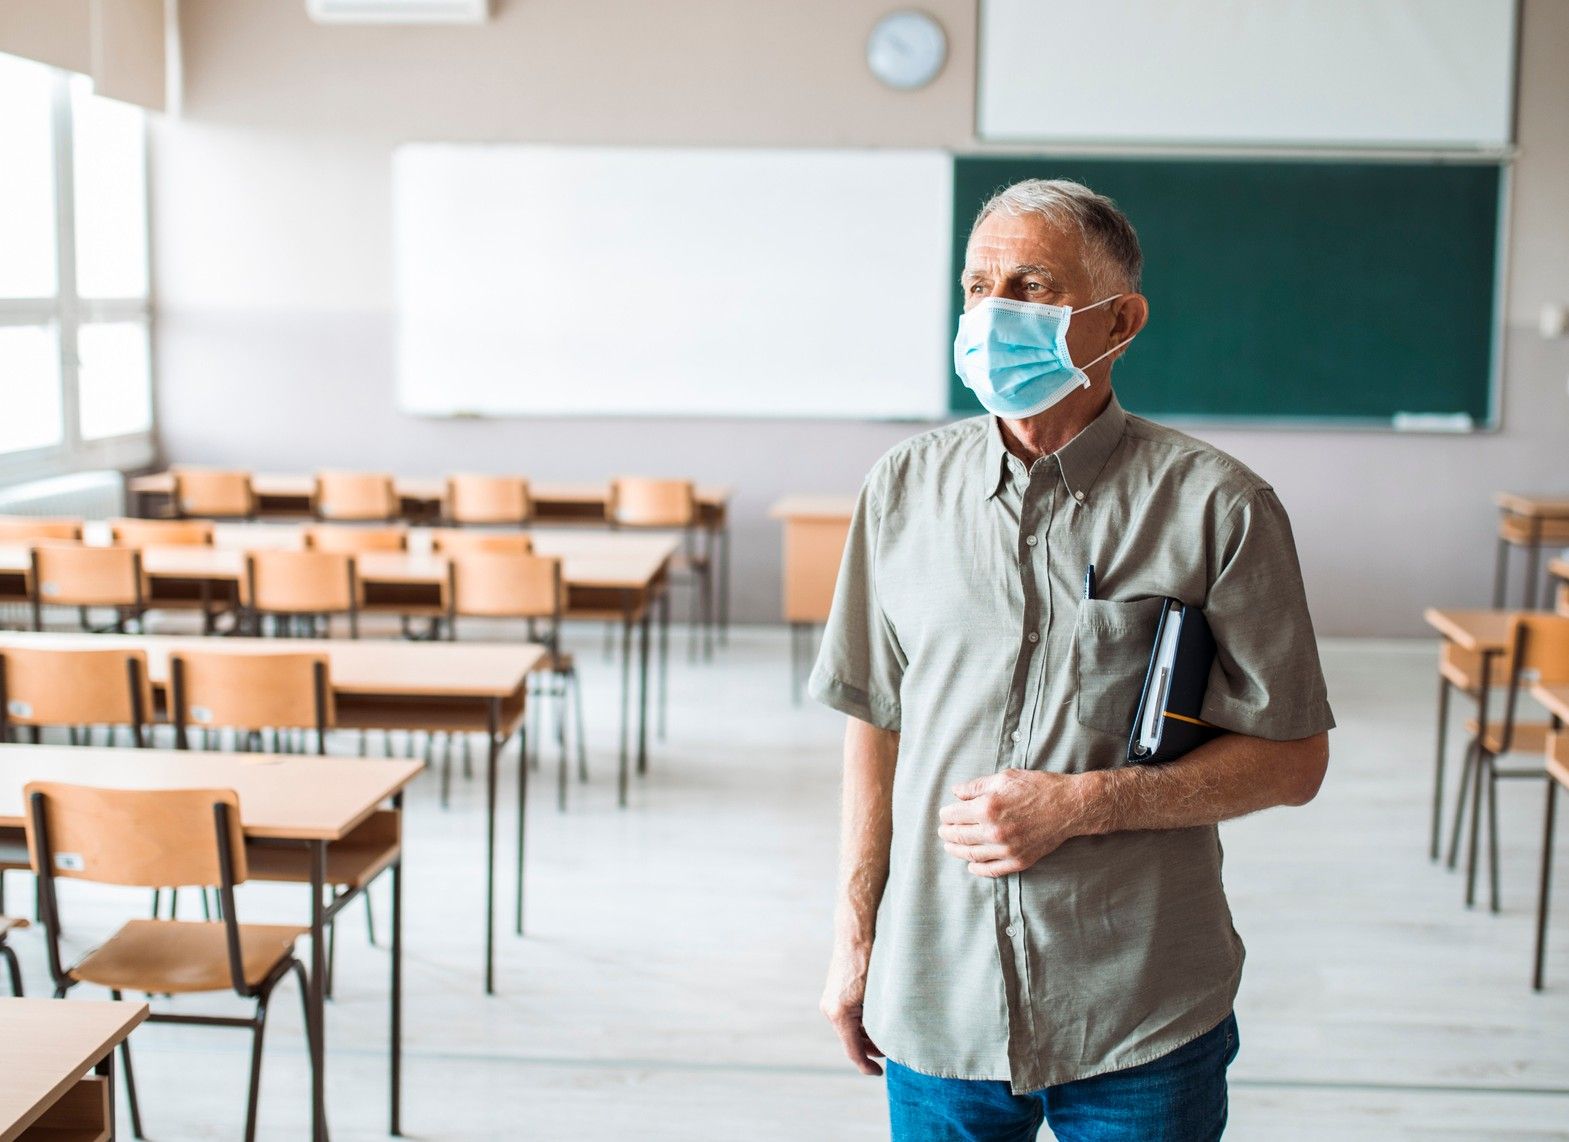 A U.K. study looked into infections among teachers.